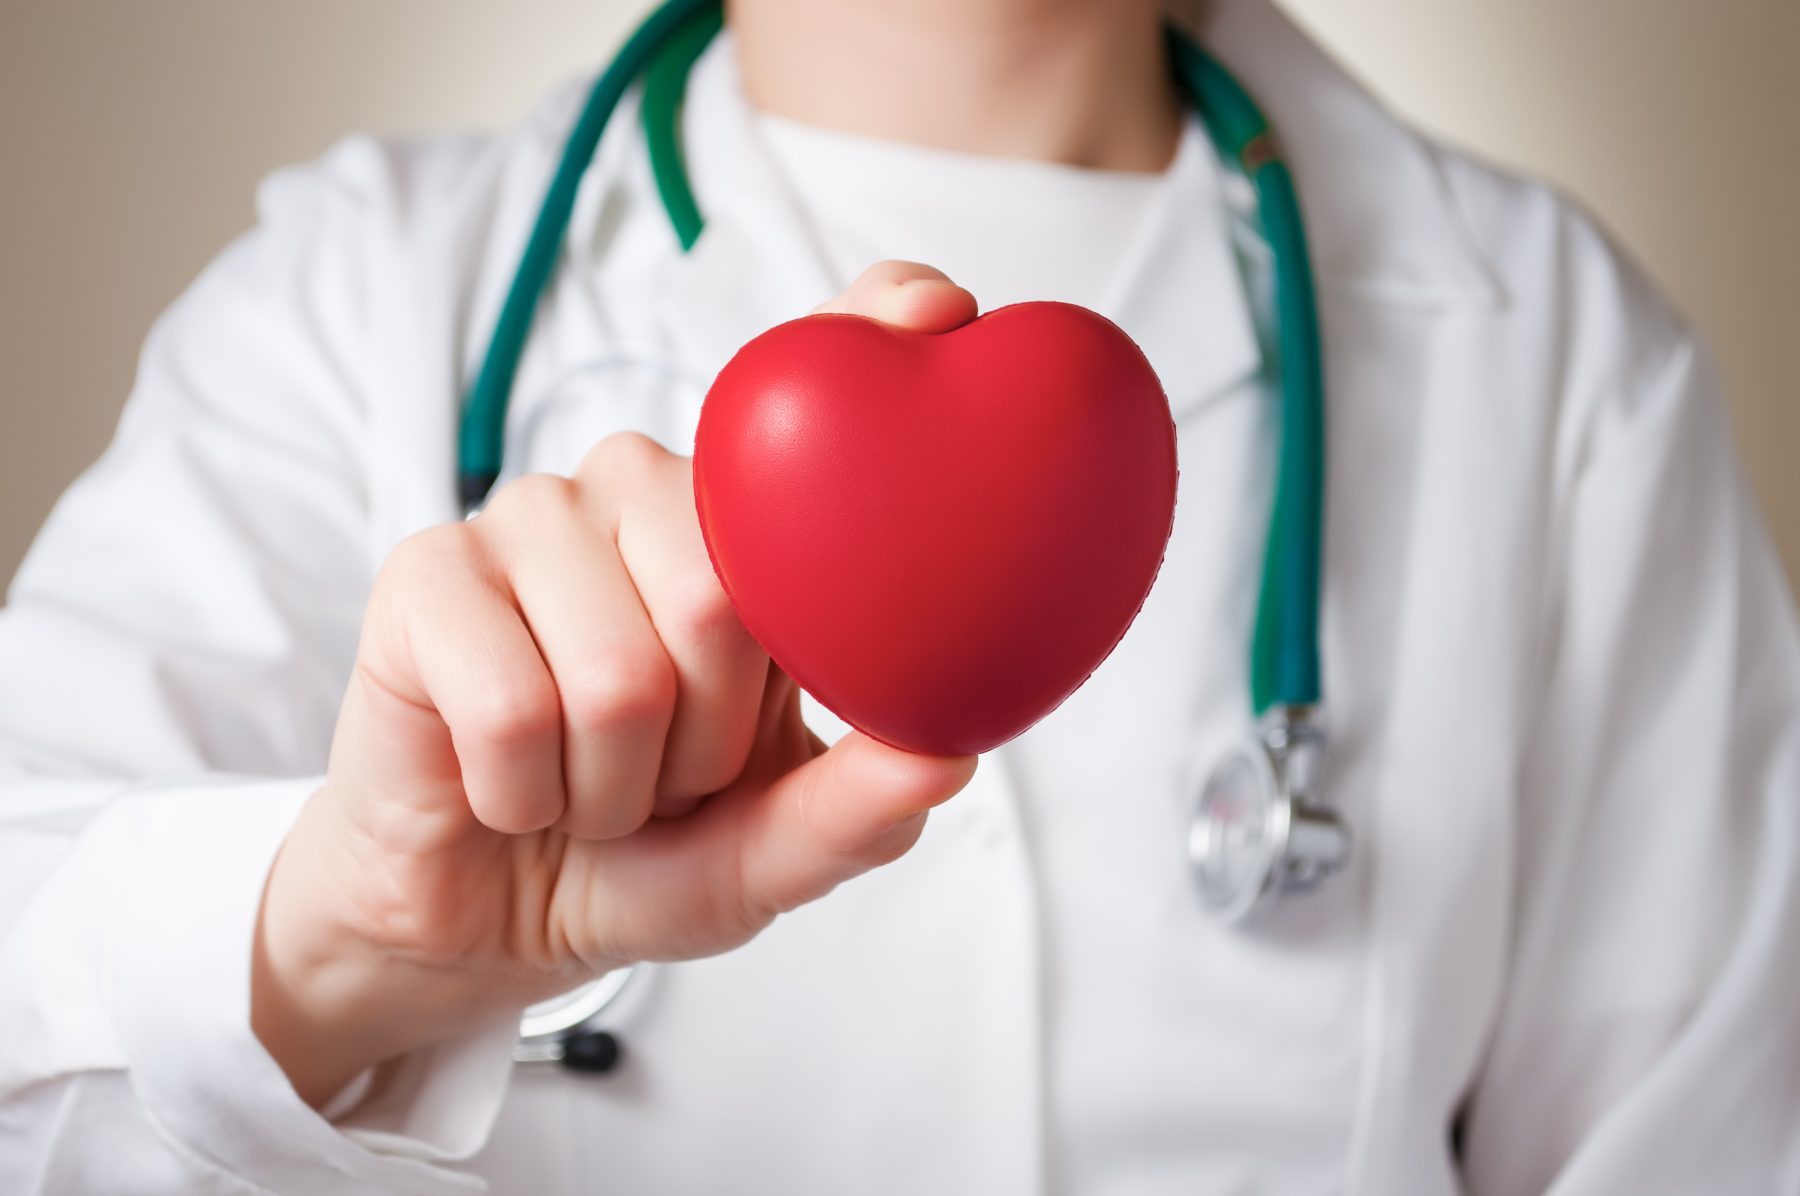 Heart in Doctor's hand representing the gift of health